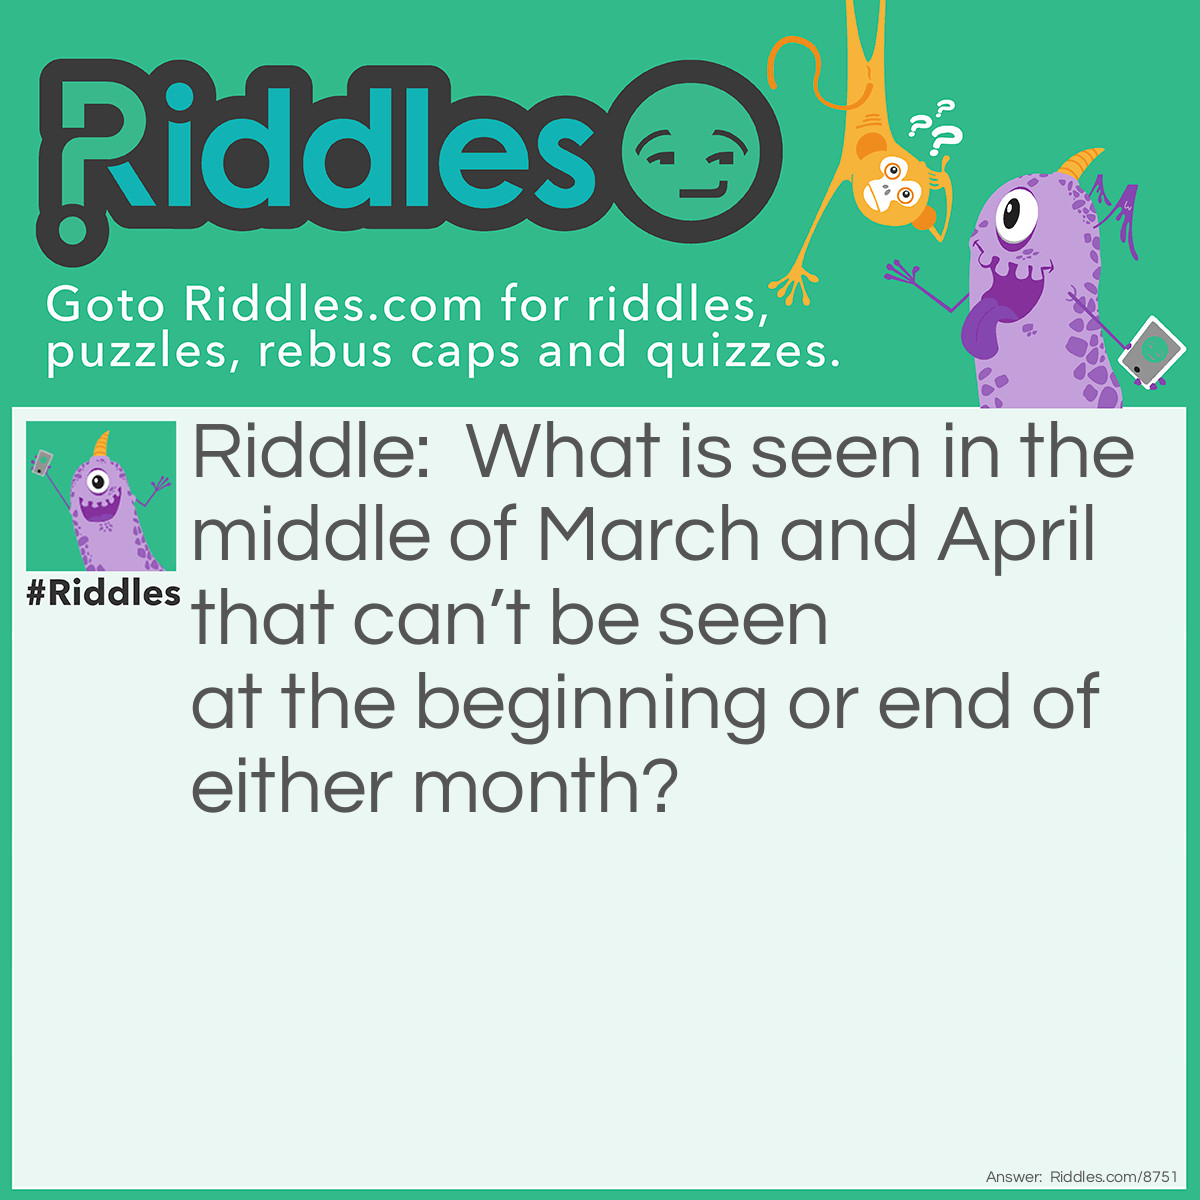 Riddle: What is seen in the middle of March and April that can't be seen at the beginning or end of either month? Answer: The letter R.